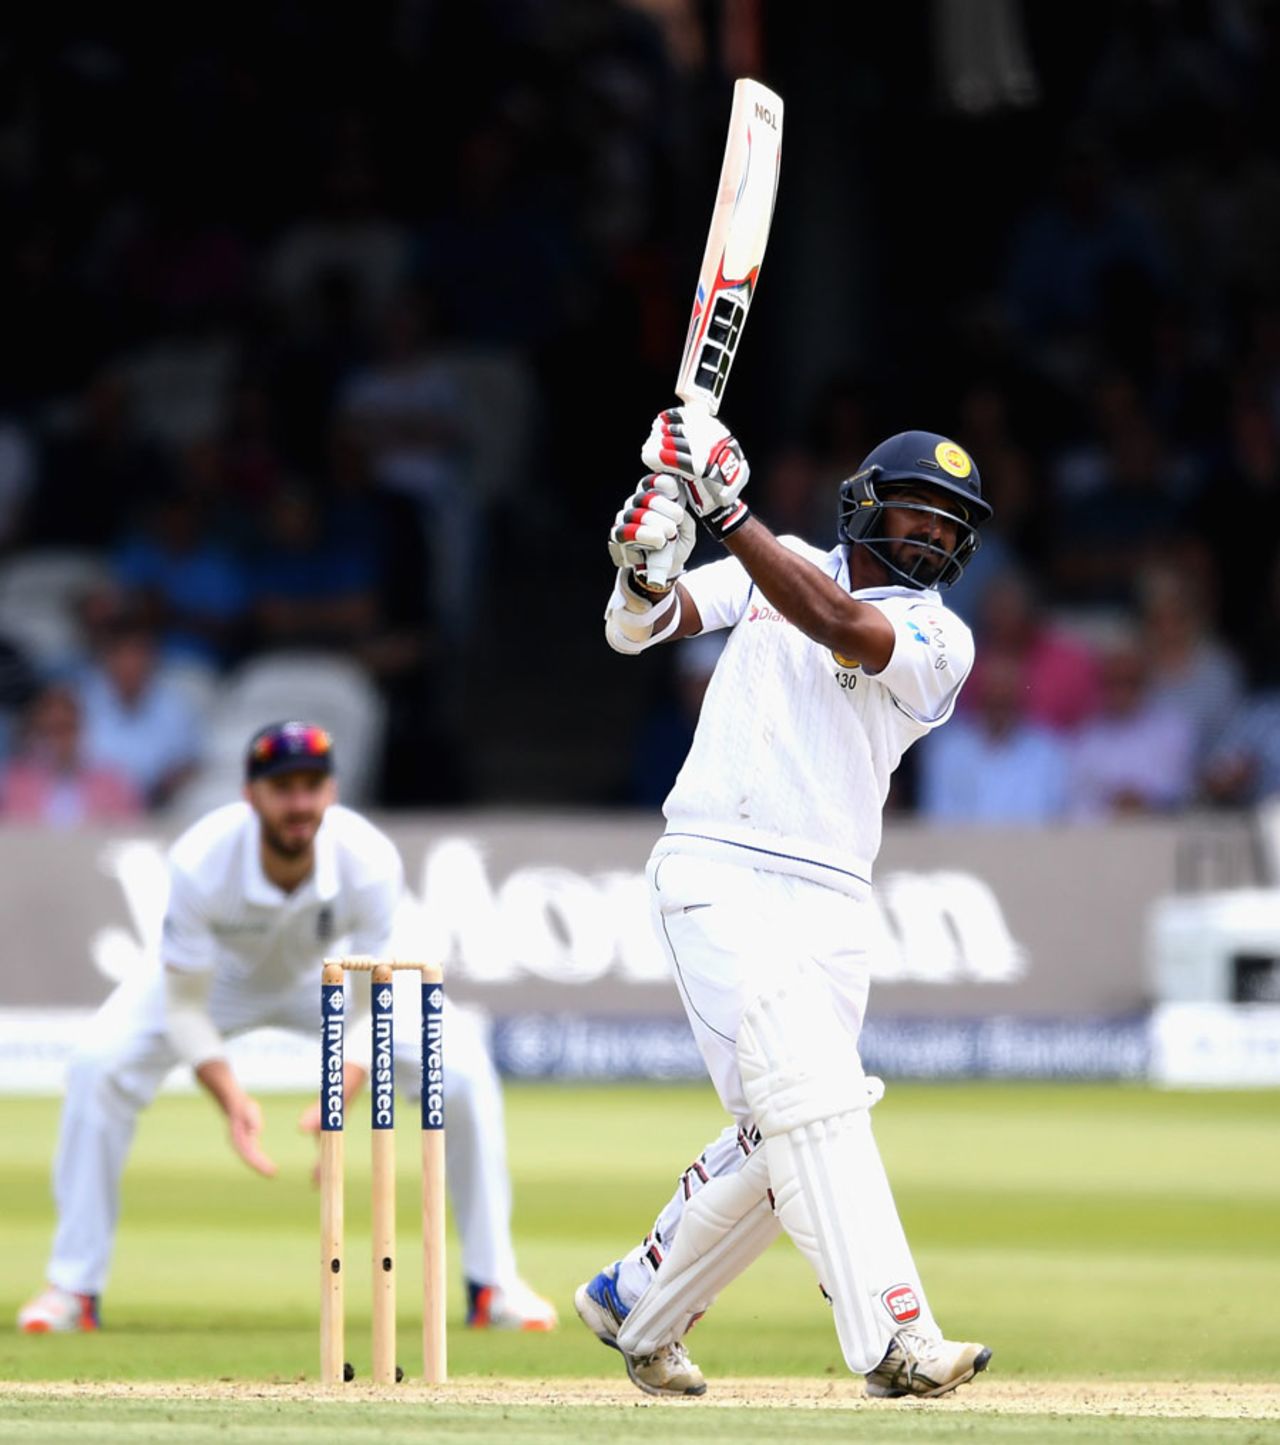 Kusal Perera played some attacking strokes, England v Sri Lanka, 3rd Investec Test, Lord's, 3rd day, June 11, 2016